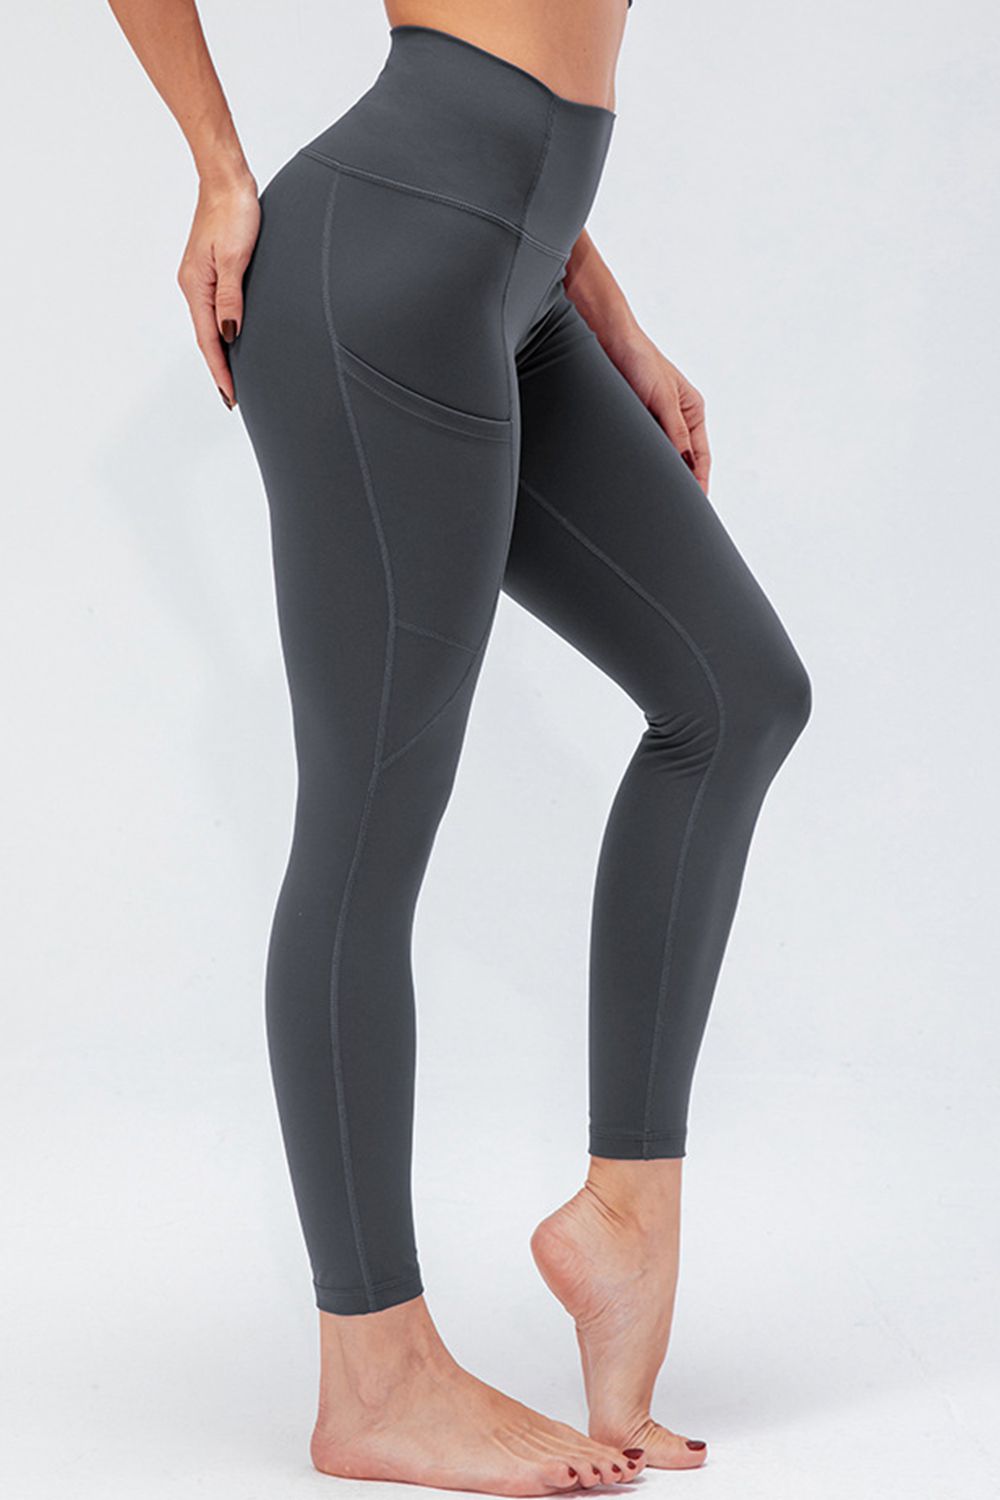 Zyia Active Breathable Athletic Leggings for Women